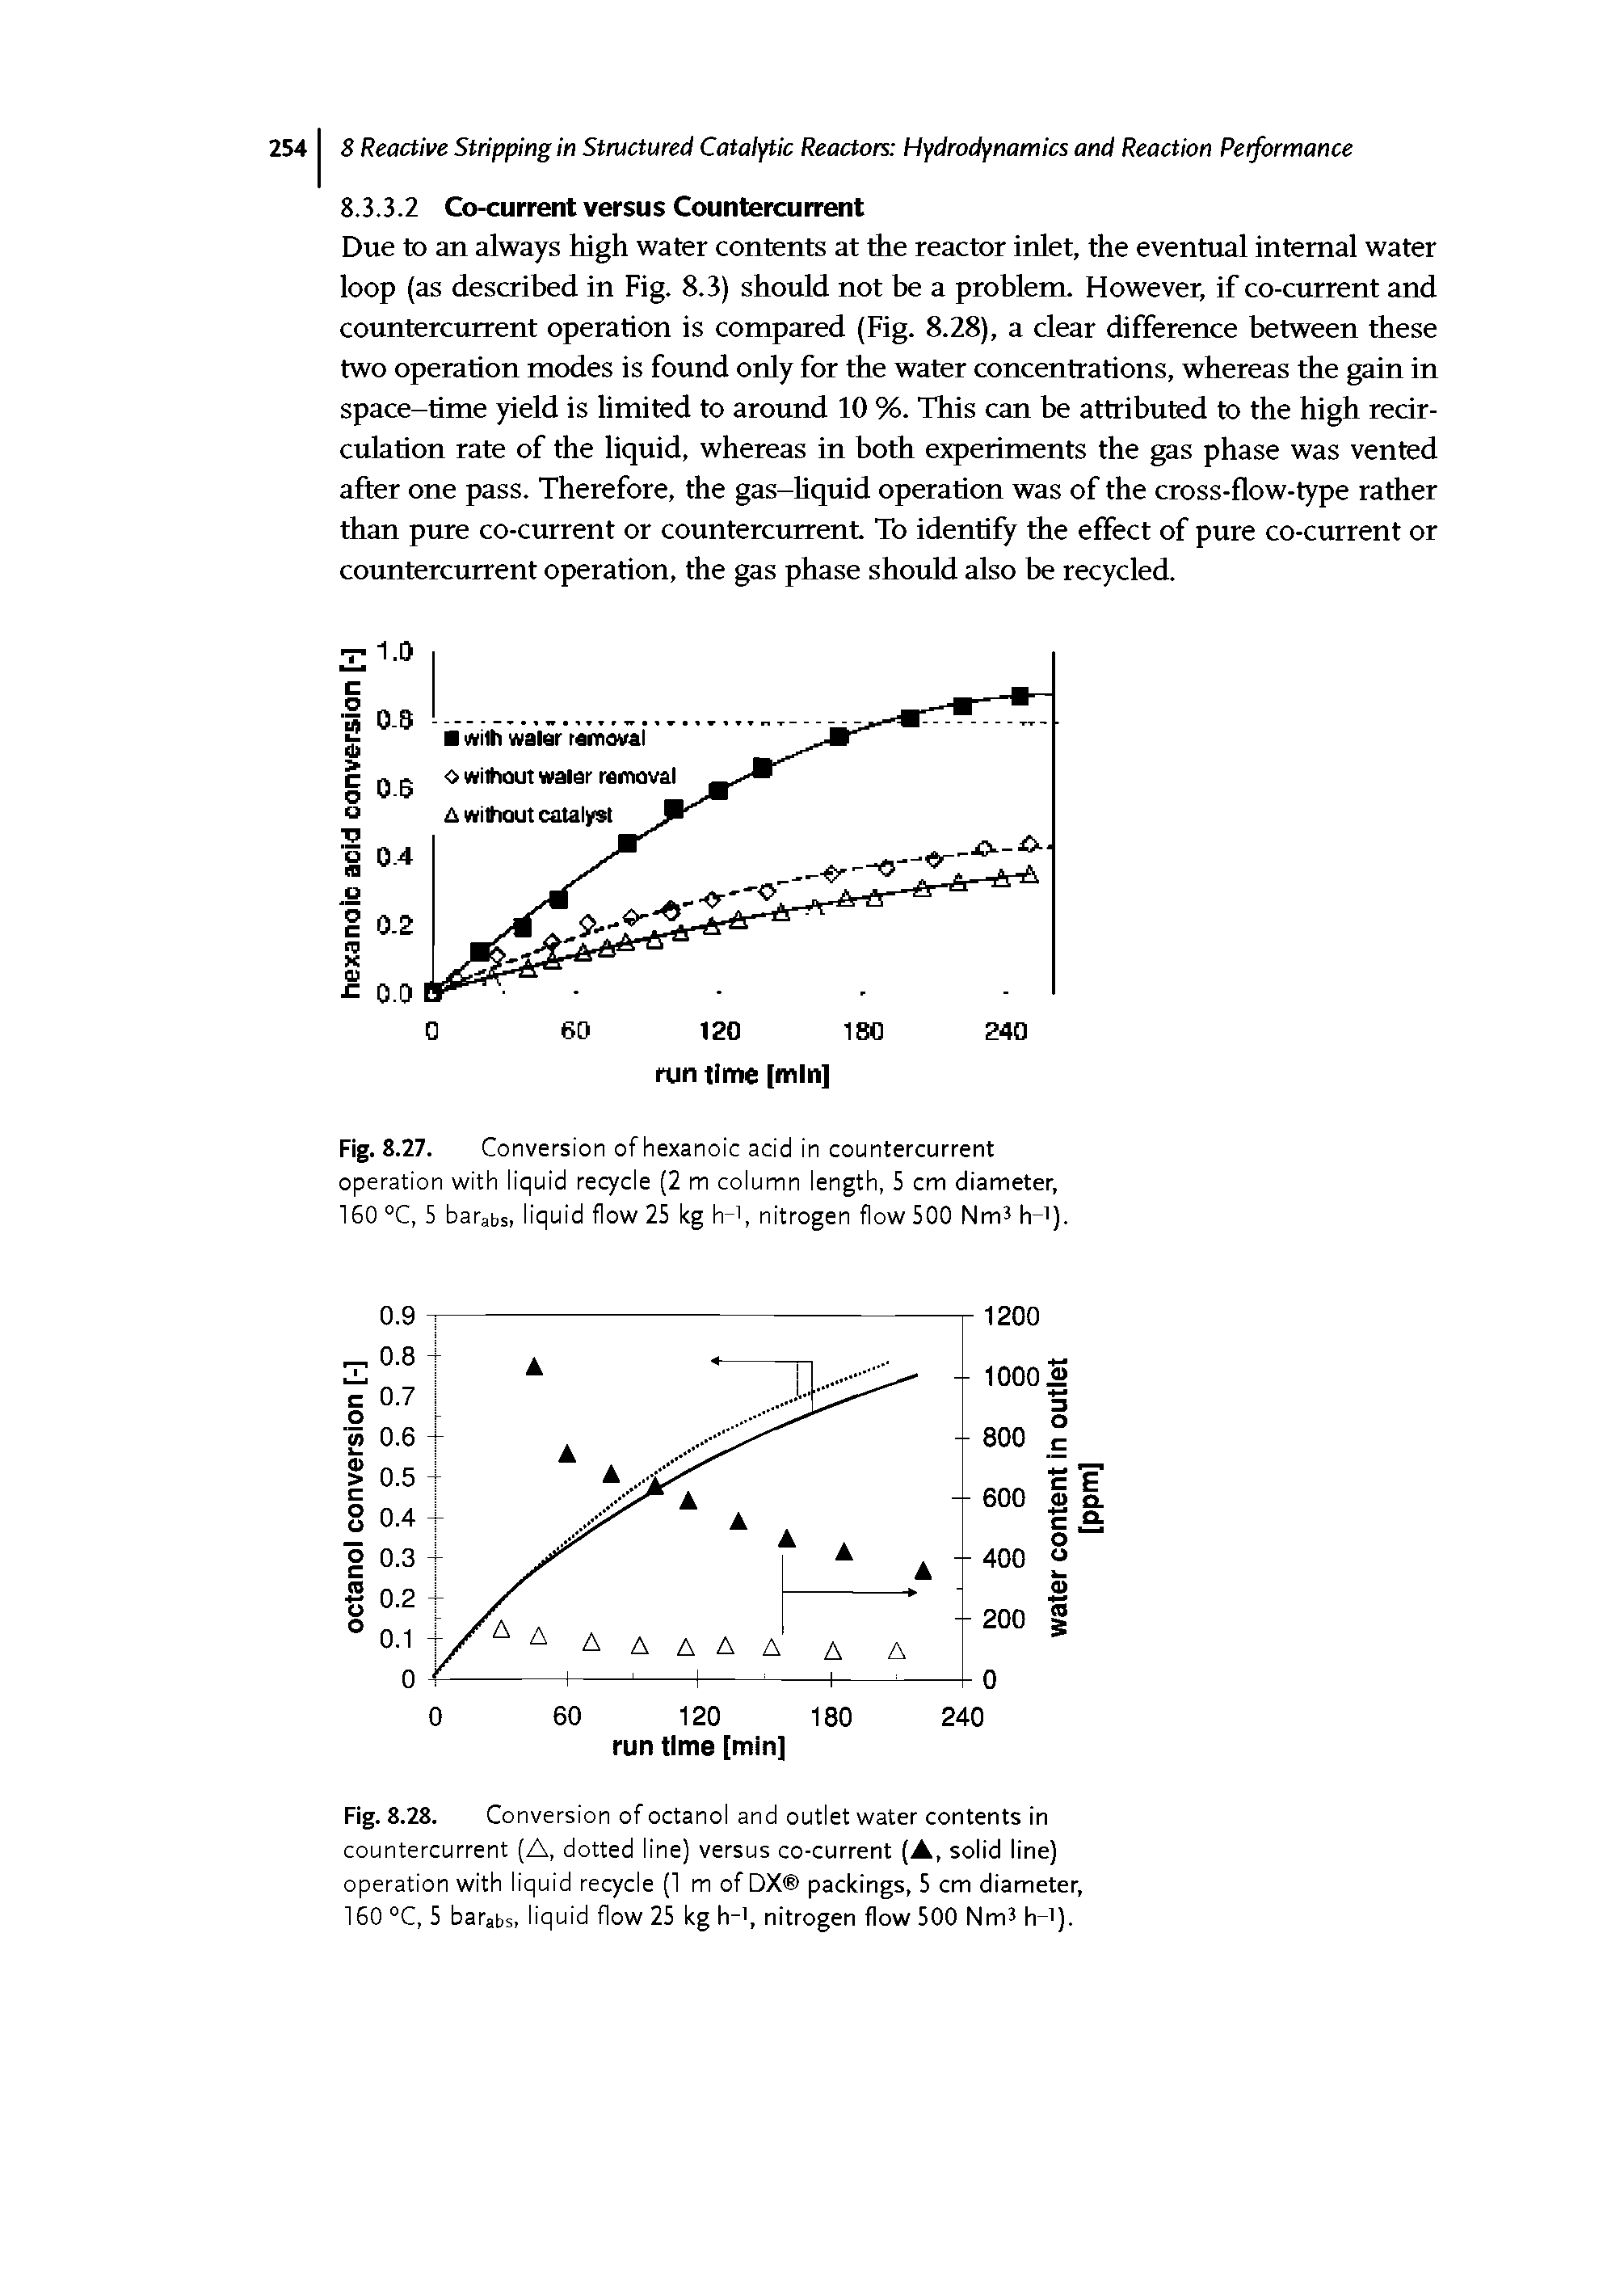 Fig. 8.28. Conversion of octanol and outlet water contents in countercurrent (A, dotted line) versus co-current (A, solid line) operation with liquid recycle (1 m of DX packings, 5 cm diameter, 160 °C, 5 barabs, liquid flow 25 kg h-, nitrogen flow 500 NmJ h 1).